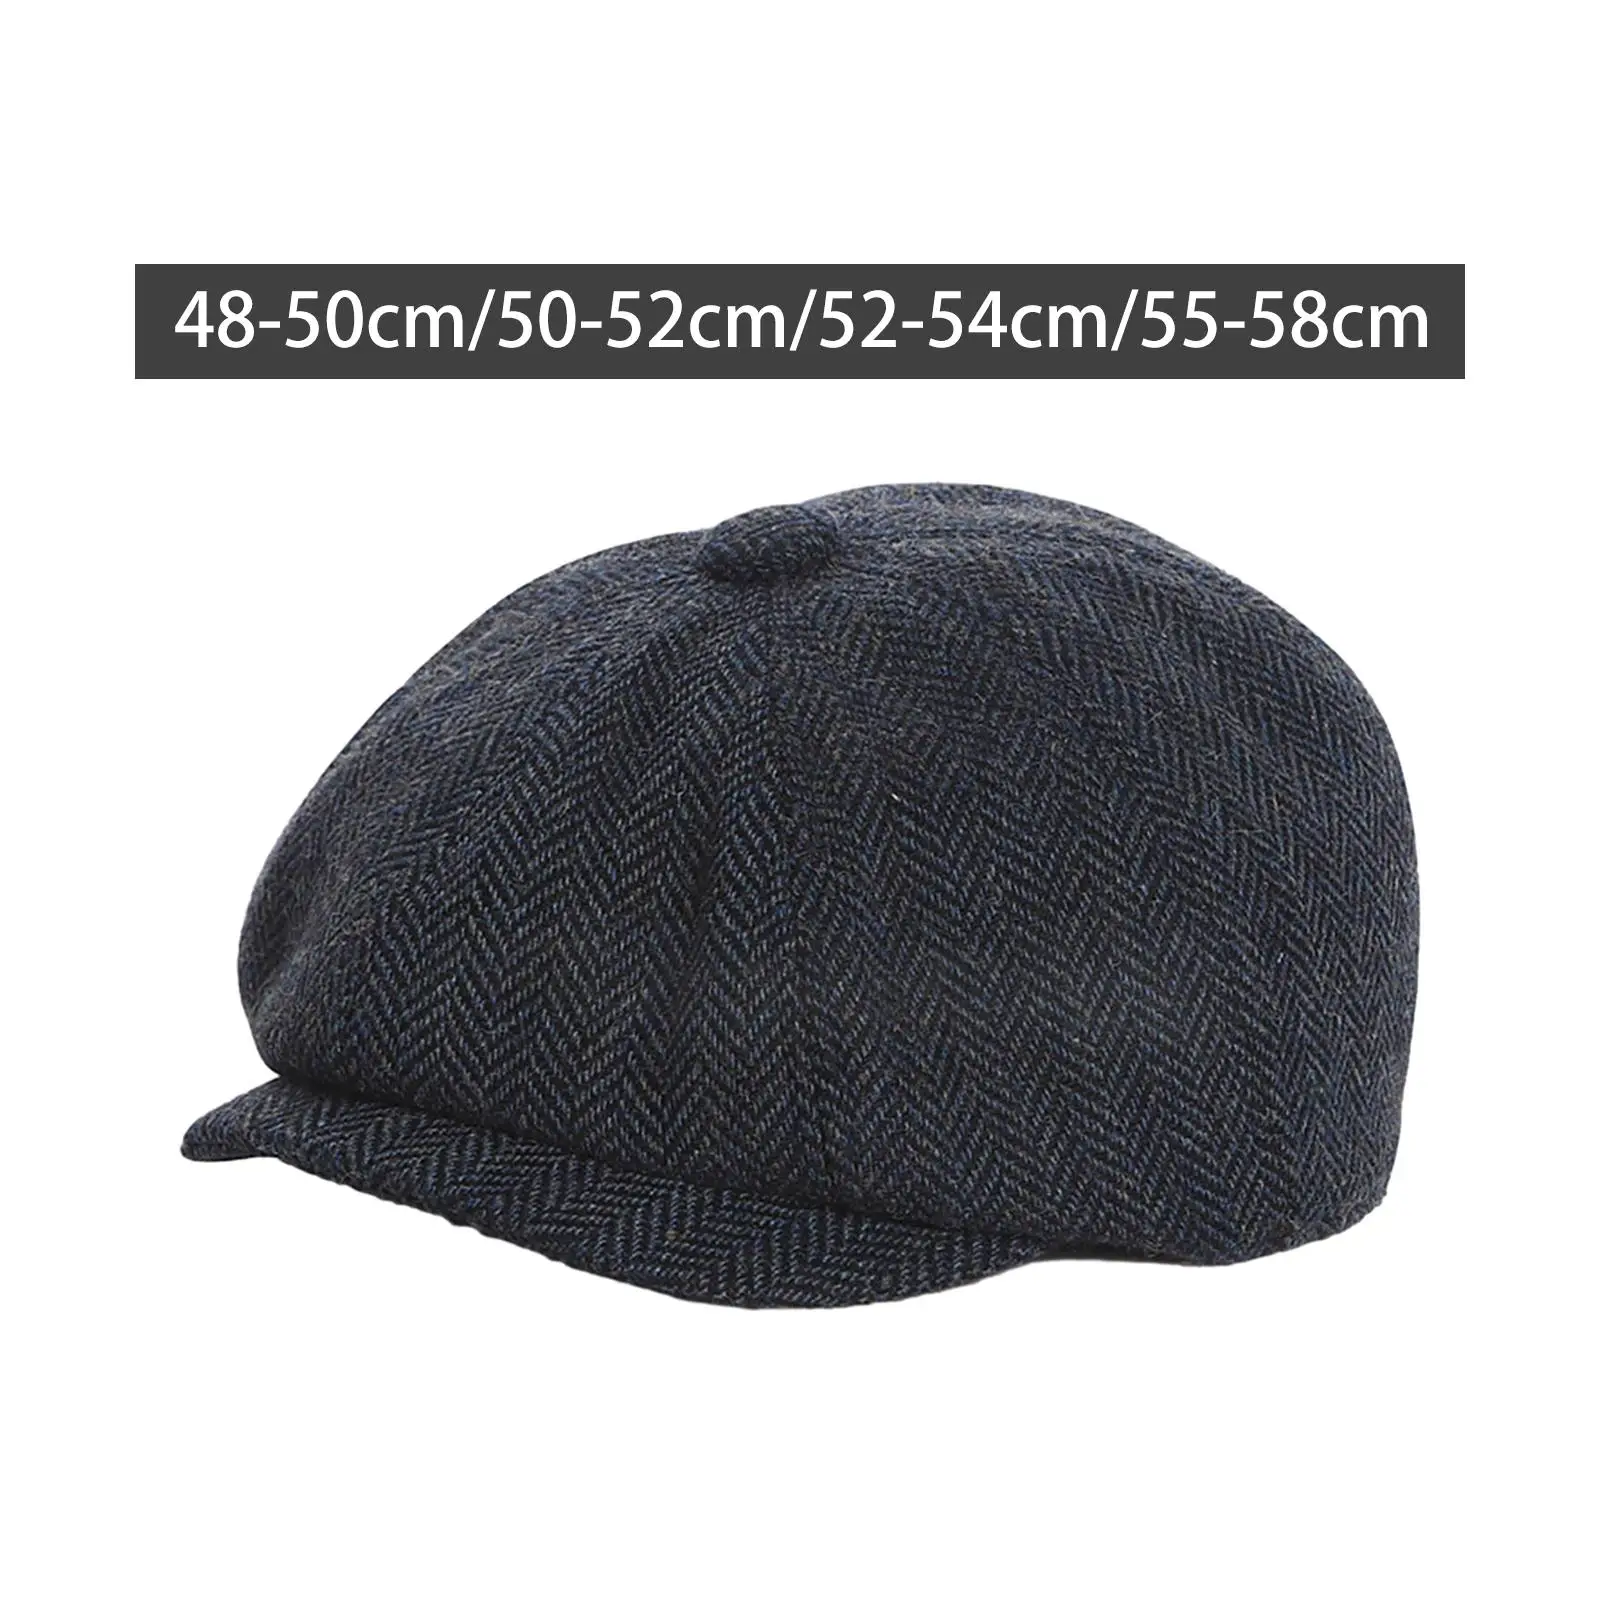 Beret Hat Casual Octagonal Newsboy Hat Autumn Winter British Classic Cabbie Hat for Camping Fishing Hiking Traveling Outdoor